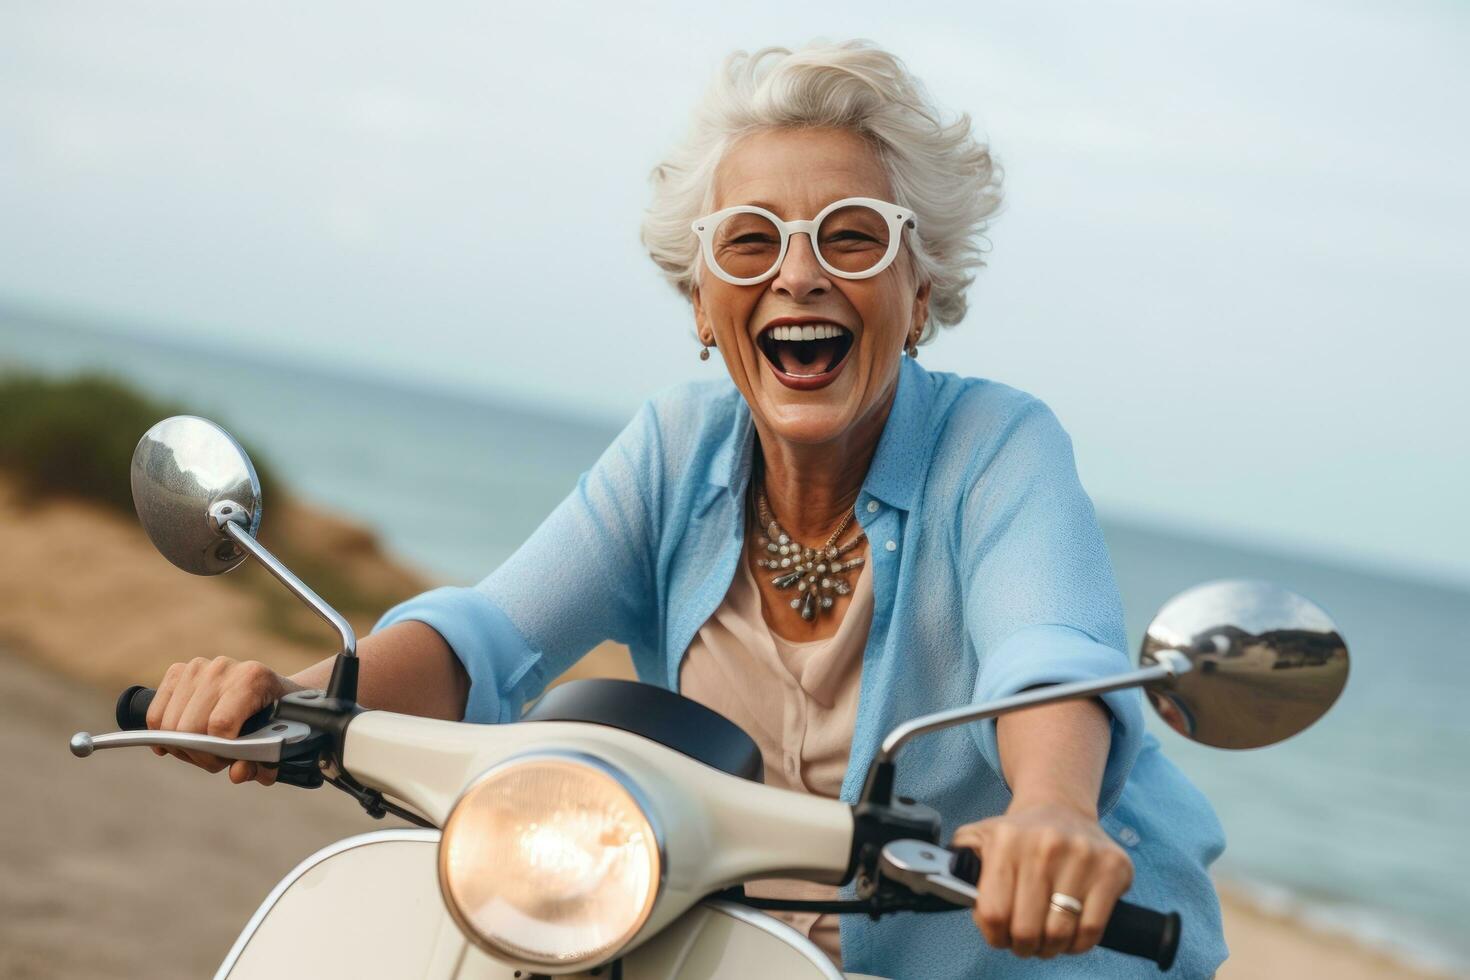 Happy mature woman on scooter, in the style of use of vintage imagery photo